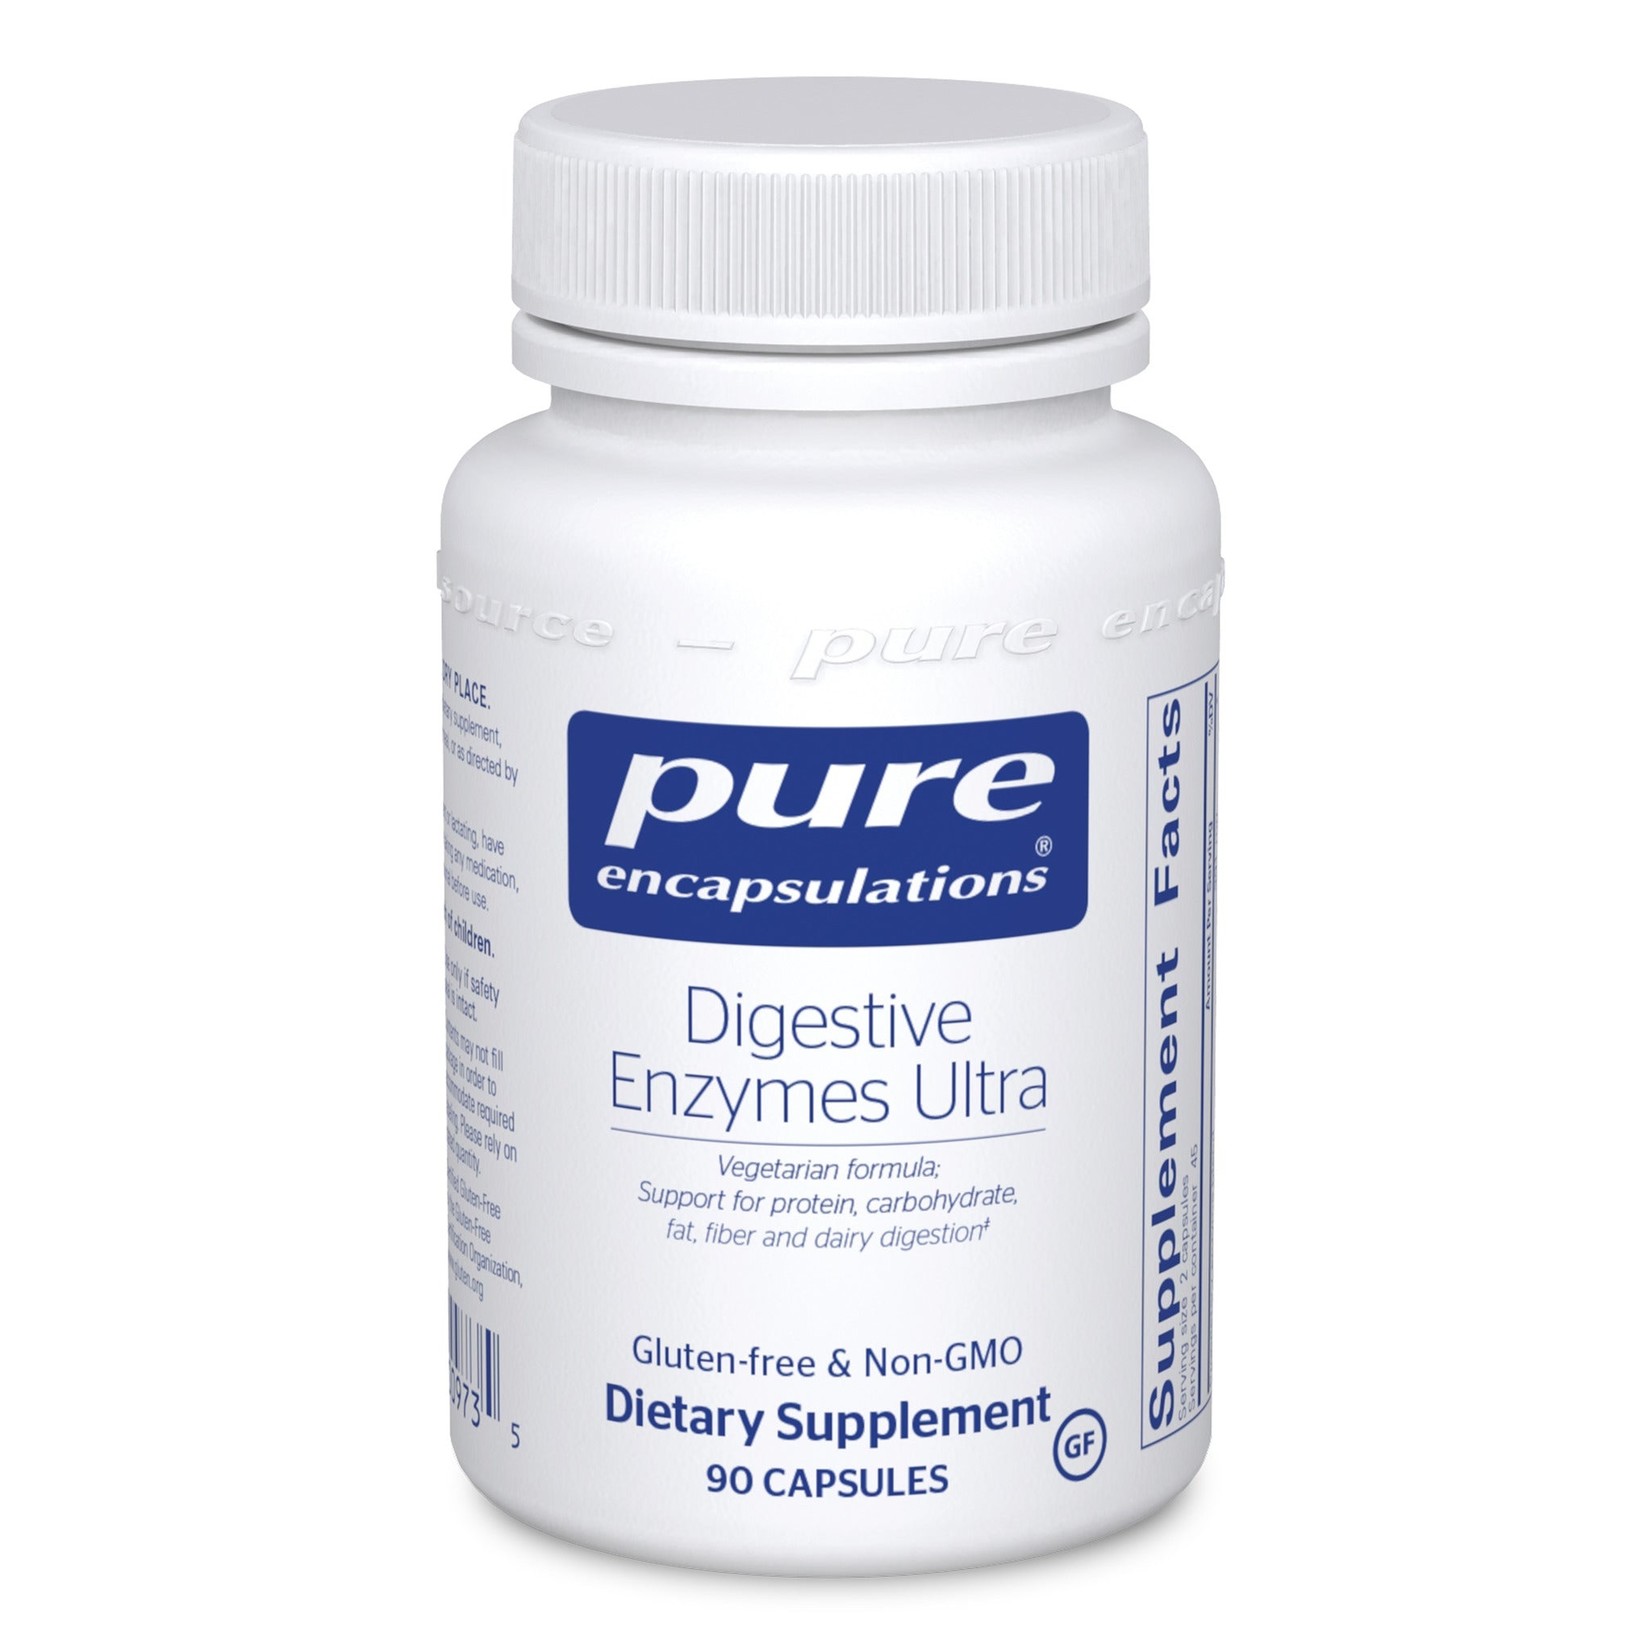 Pure Encapsulations Pure Encapsulations - Digestive Enzymes Ultra - 90 Capsules